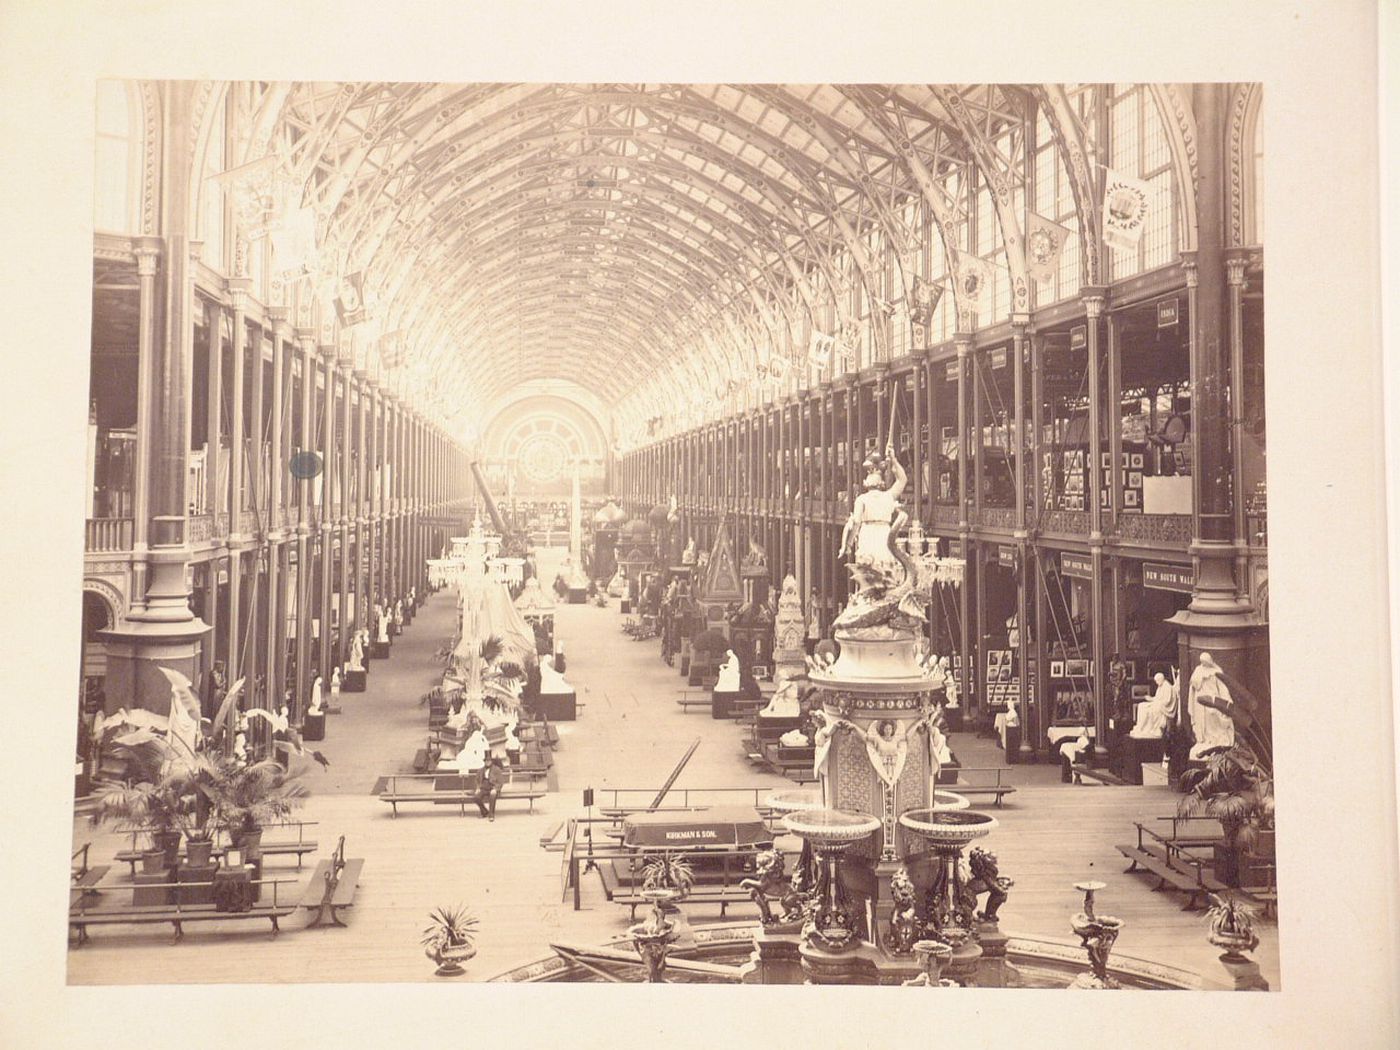 International Exhibition, interior view of hall with fountain in foreground, London, England